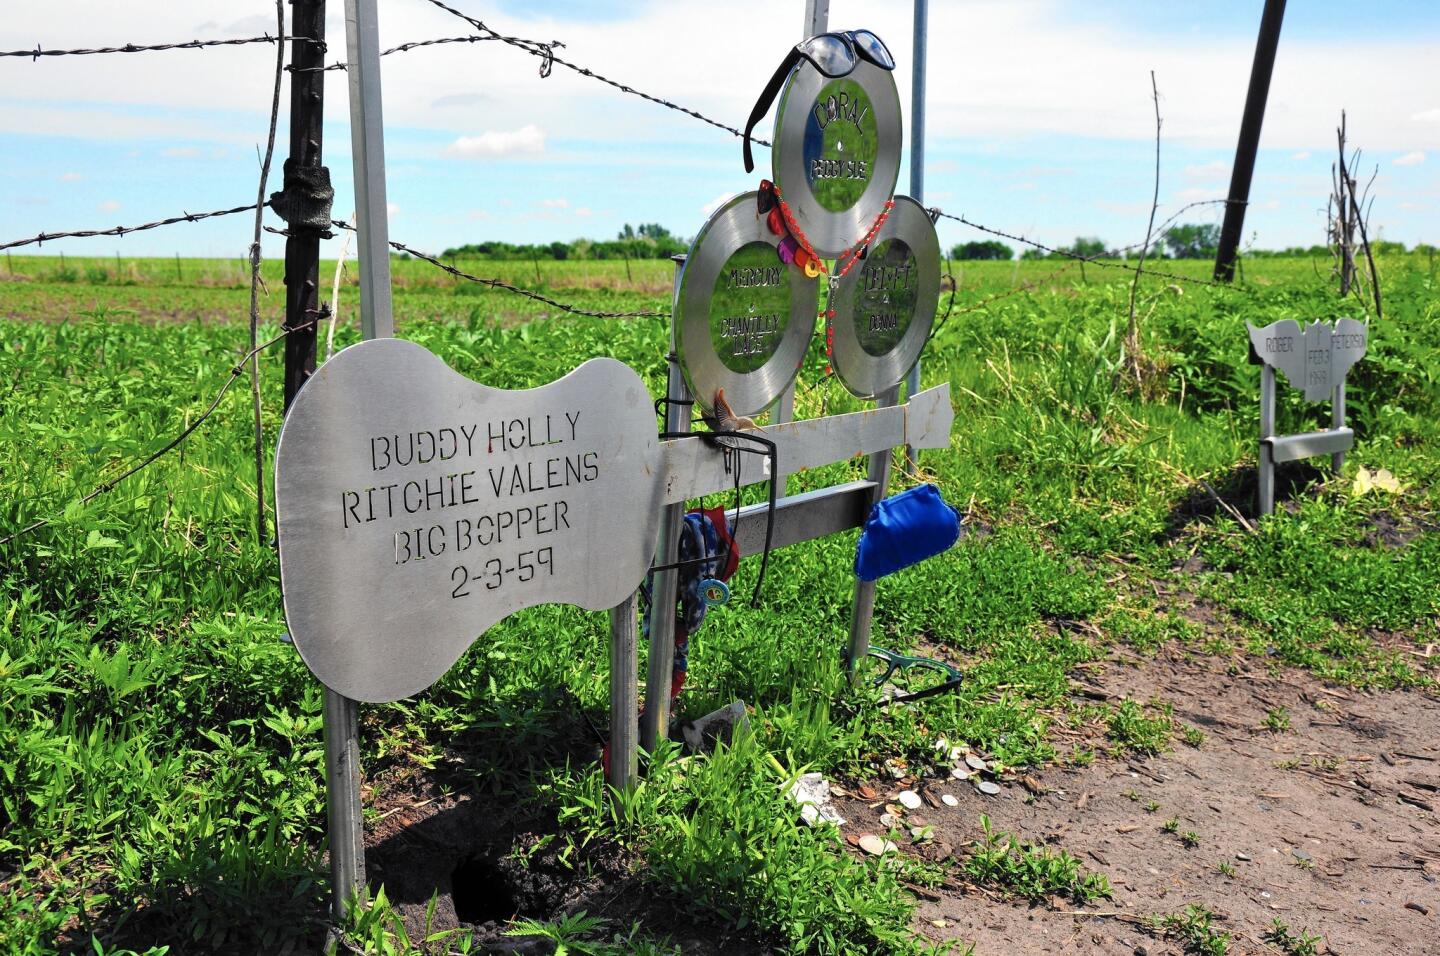 A memorial in a cornfield north of Clear Lake, Iowa, marks the site of a plane crash that took the lives of Buddy Holly, Ritchie Valens and J.P. "The Big Bopper" Richardson in 1959.